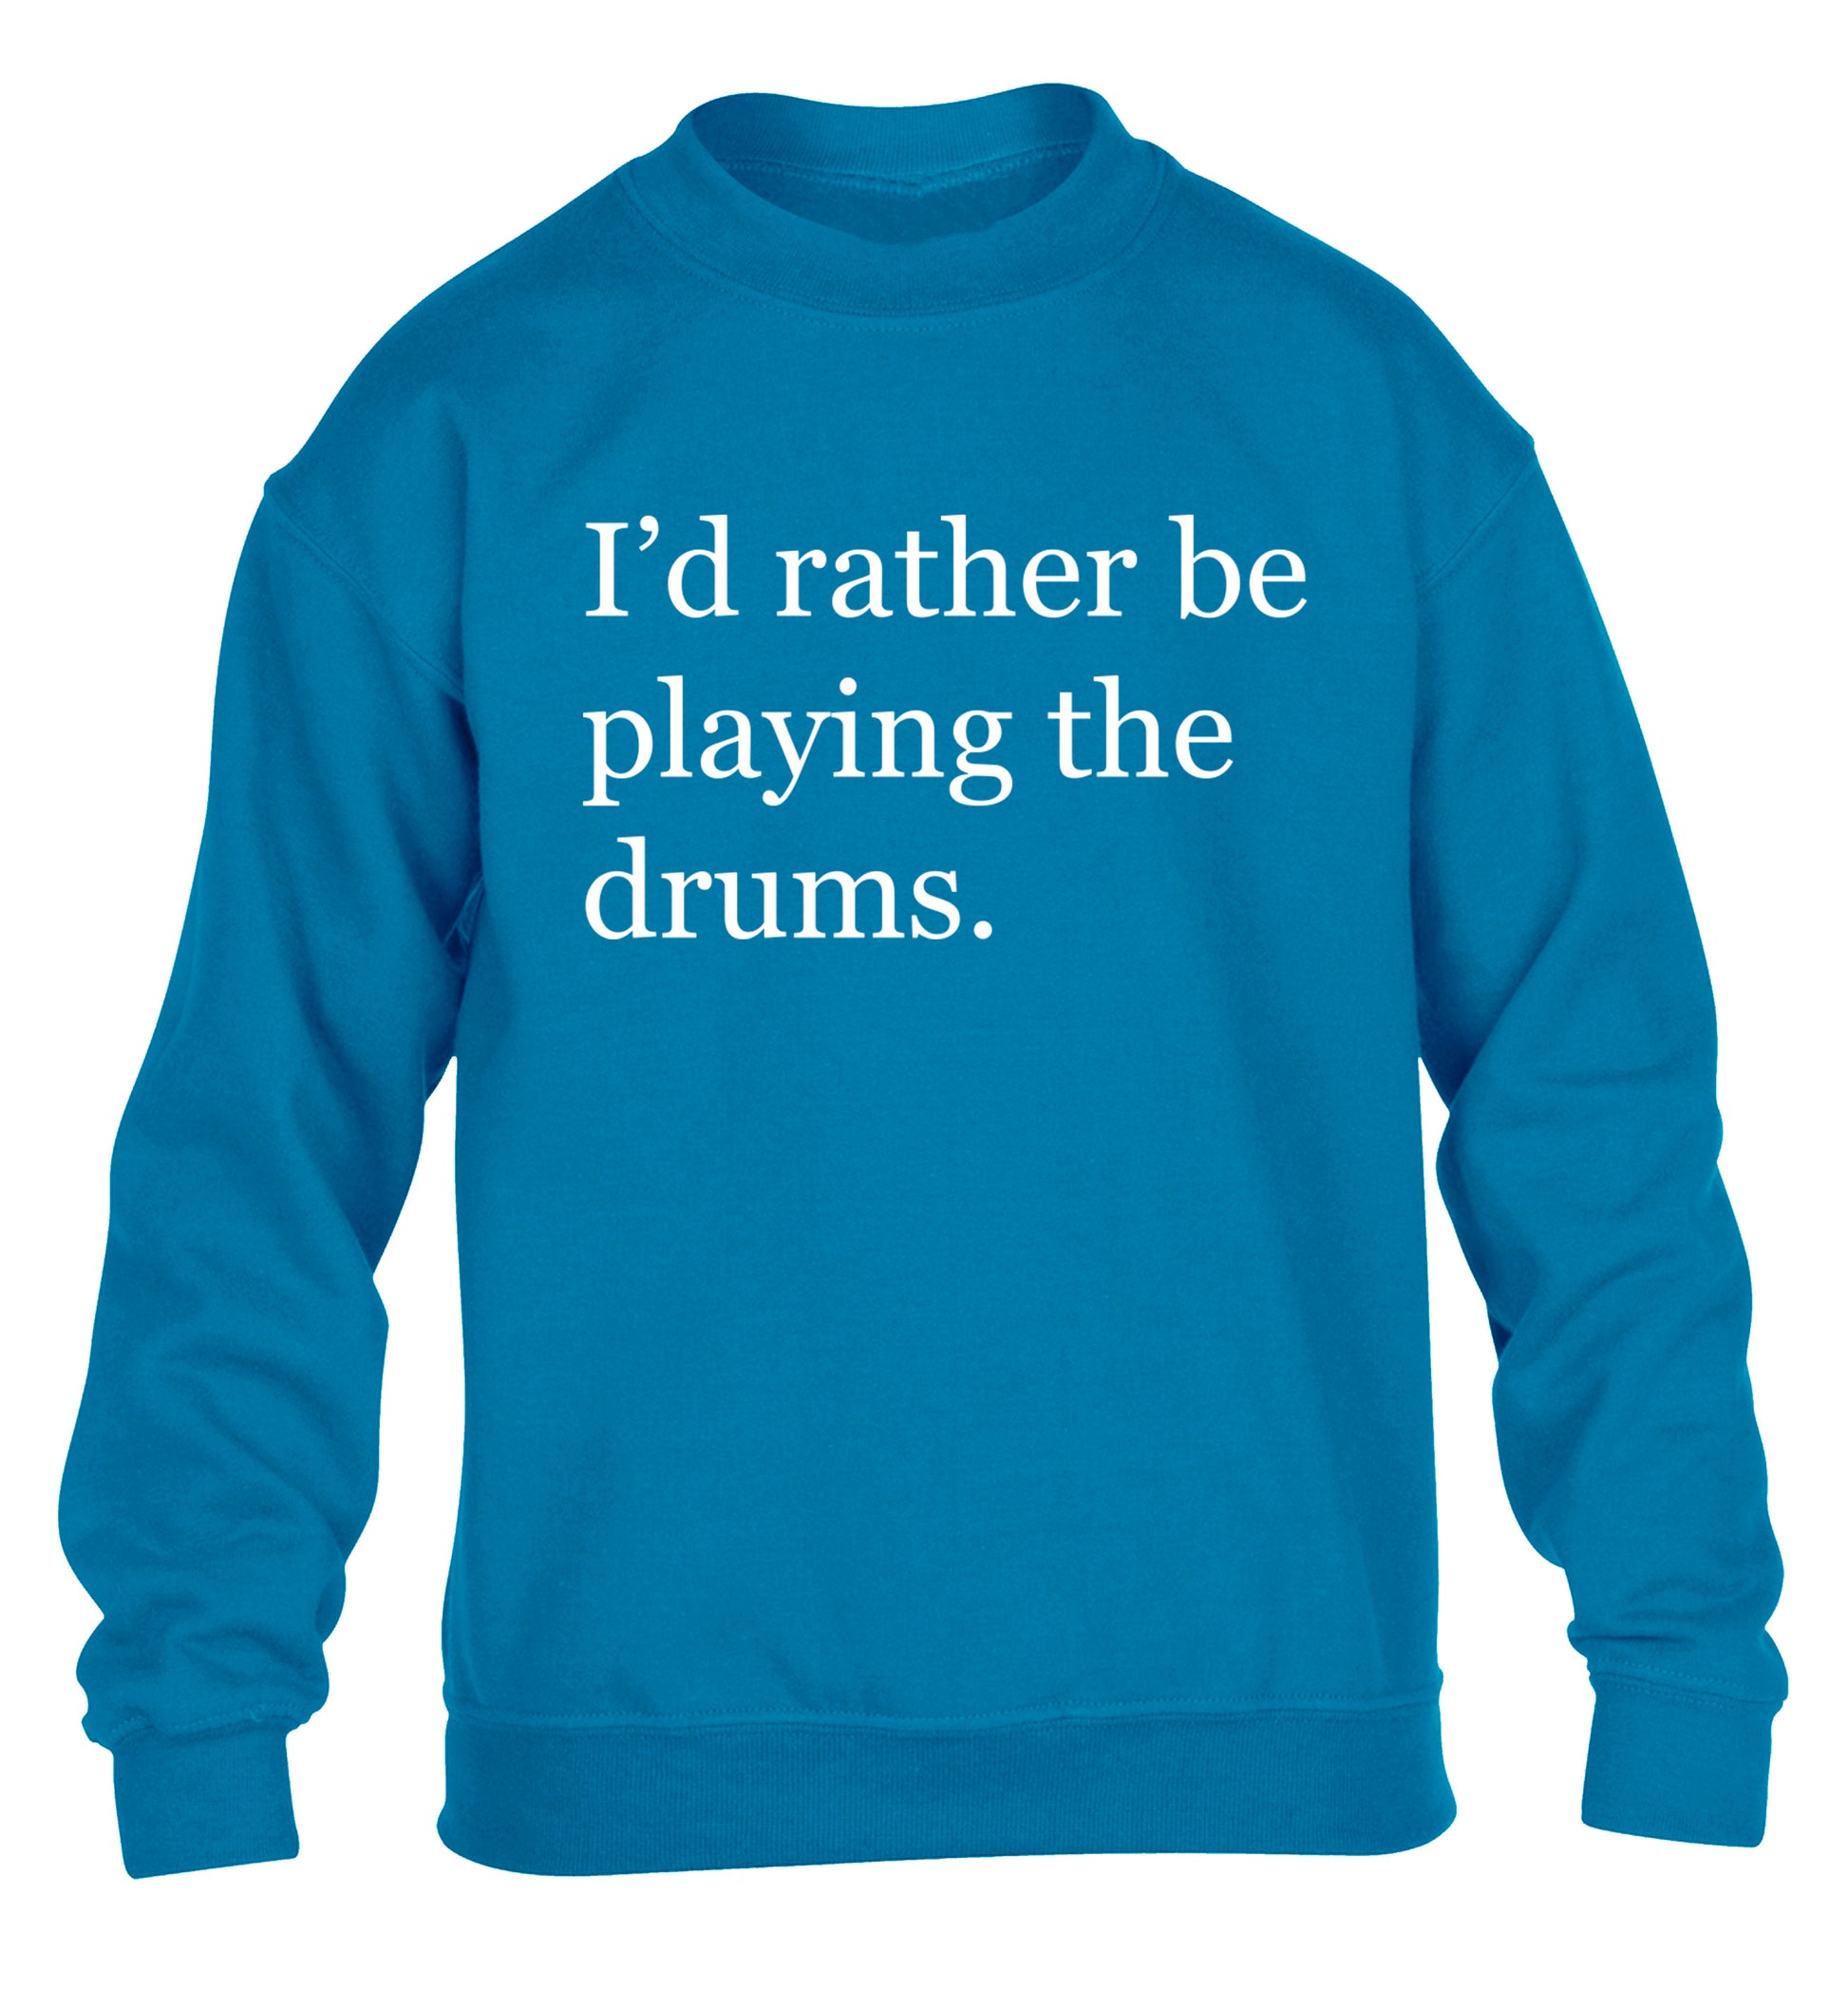 I'd rather be playing the drums children's blue sweater 12-14 Years